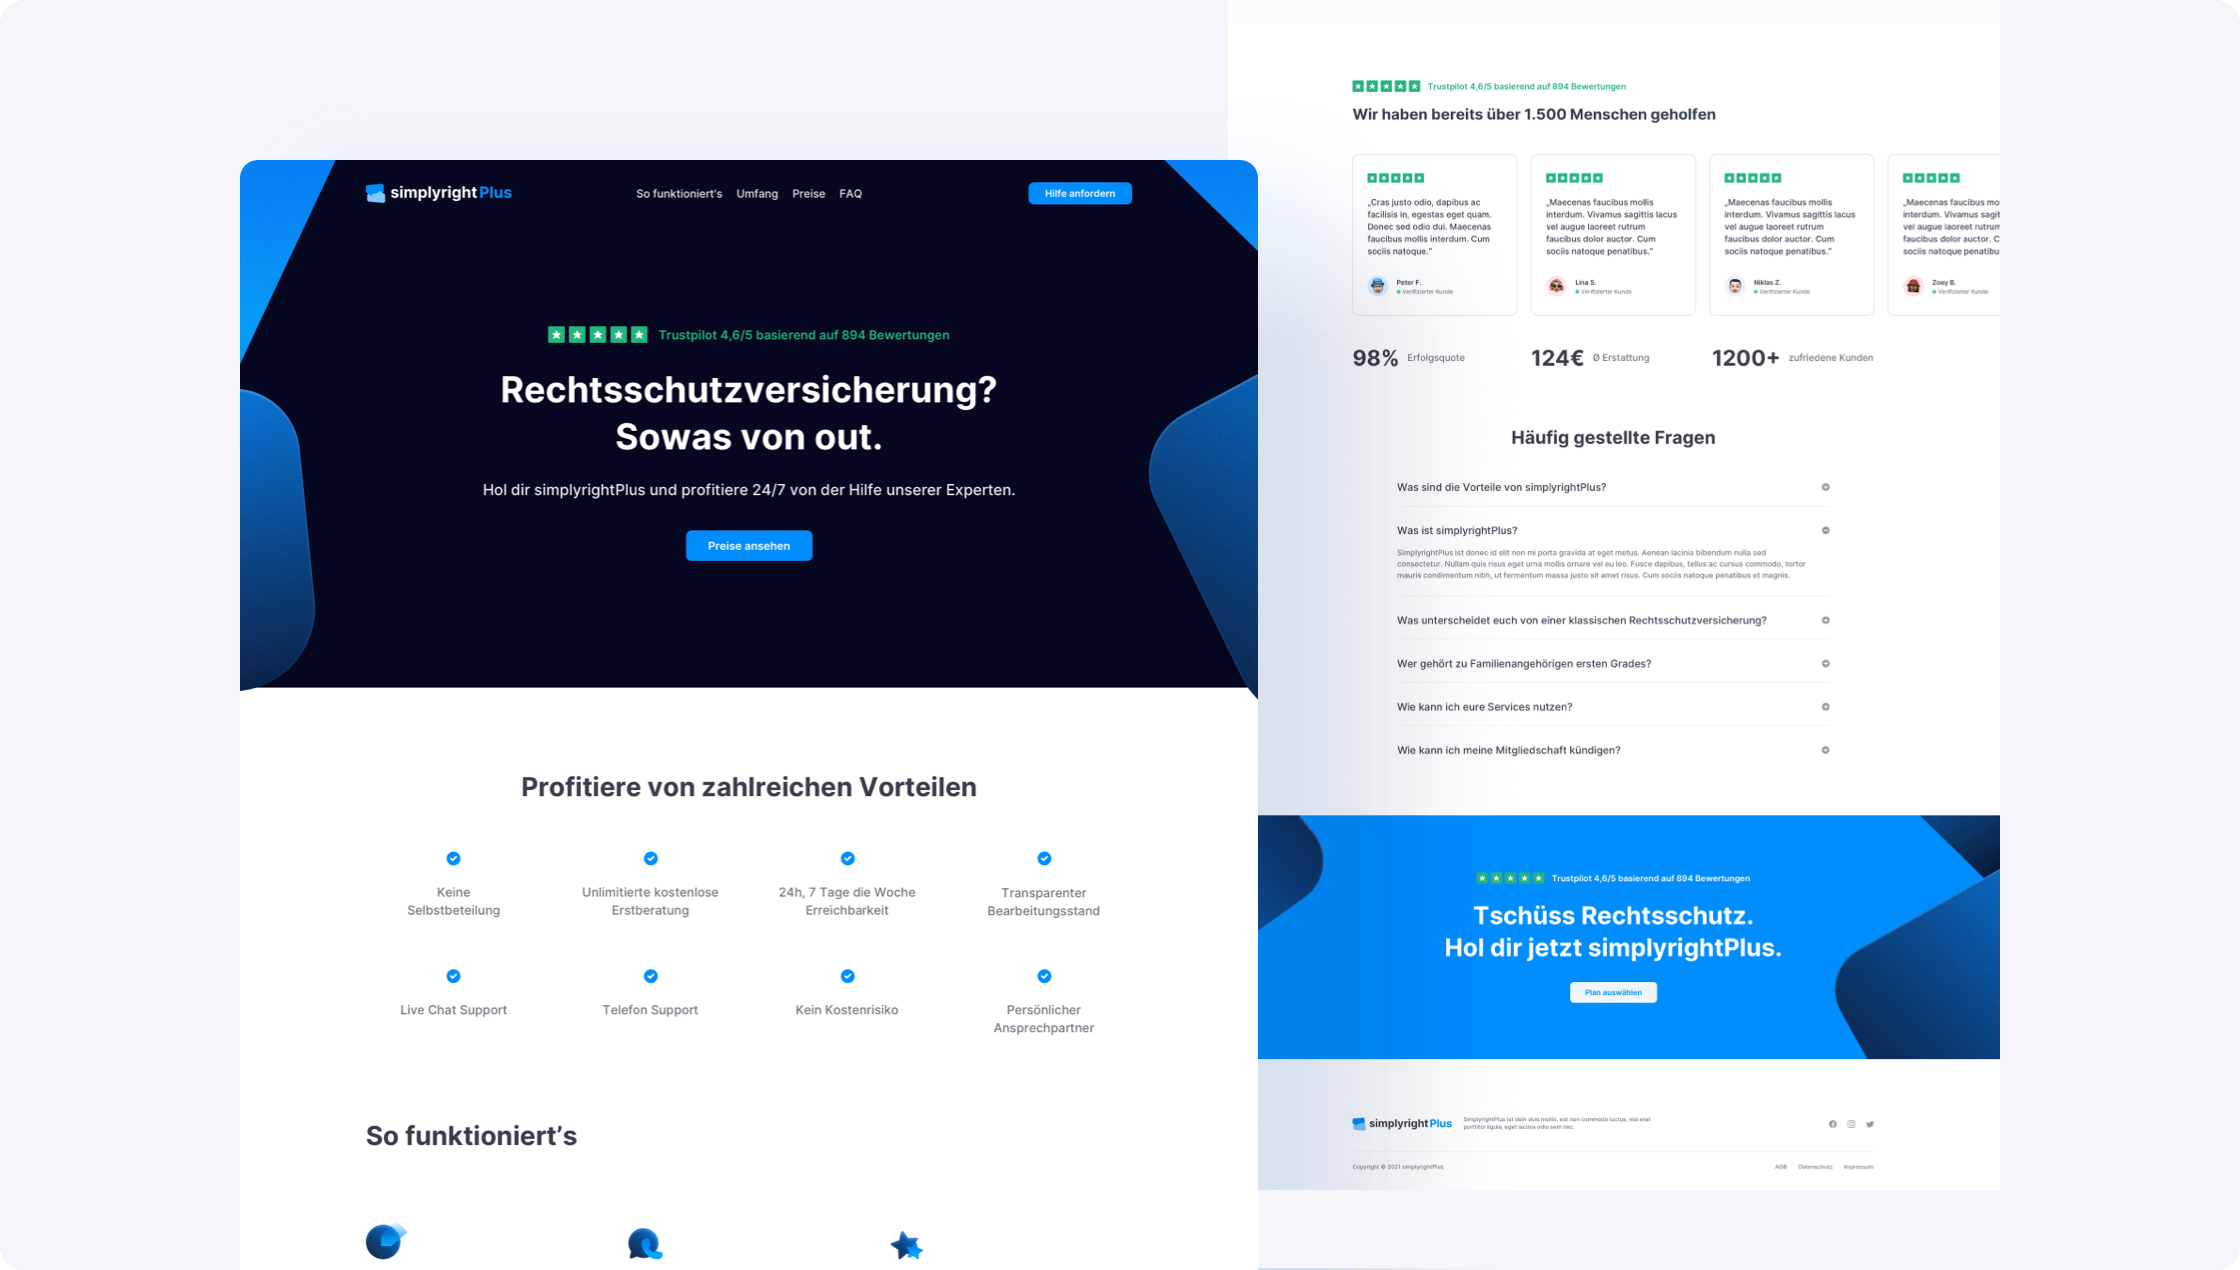 The landing page of simplyrightPlus